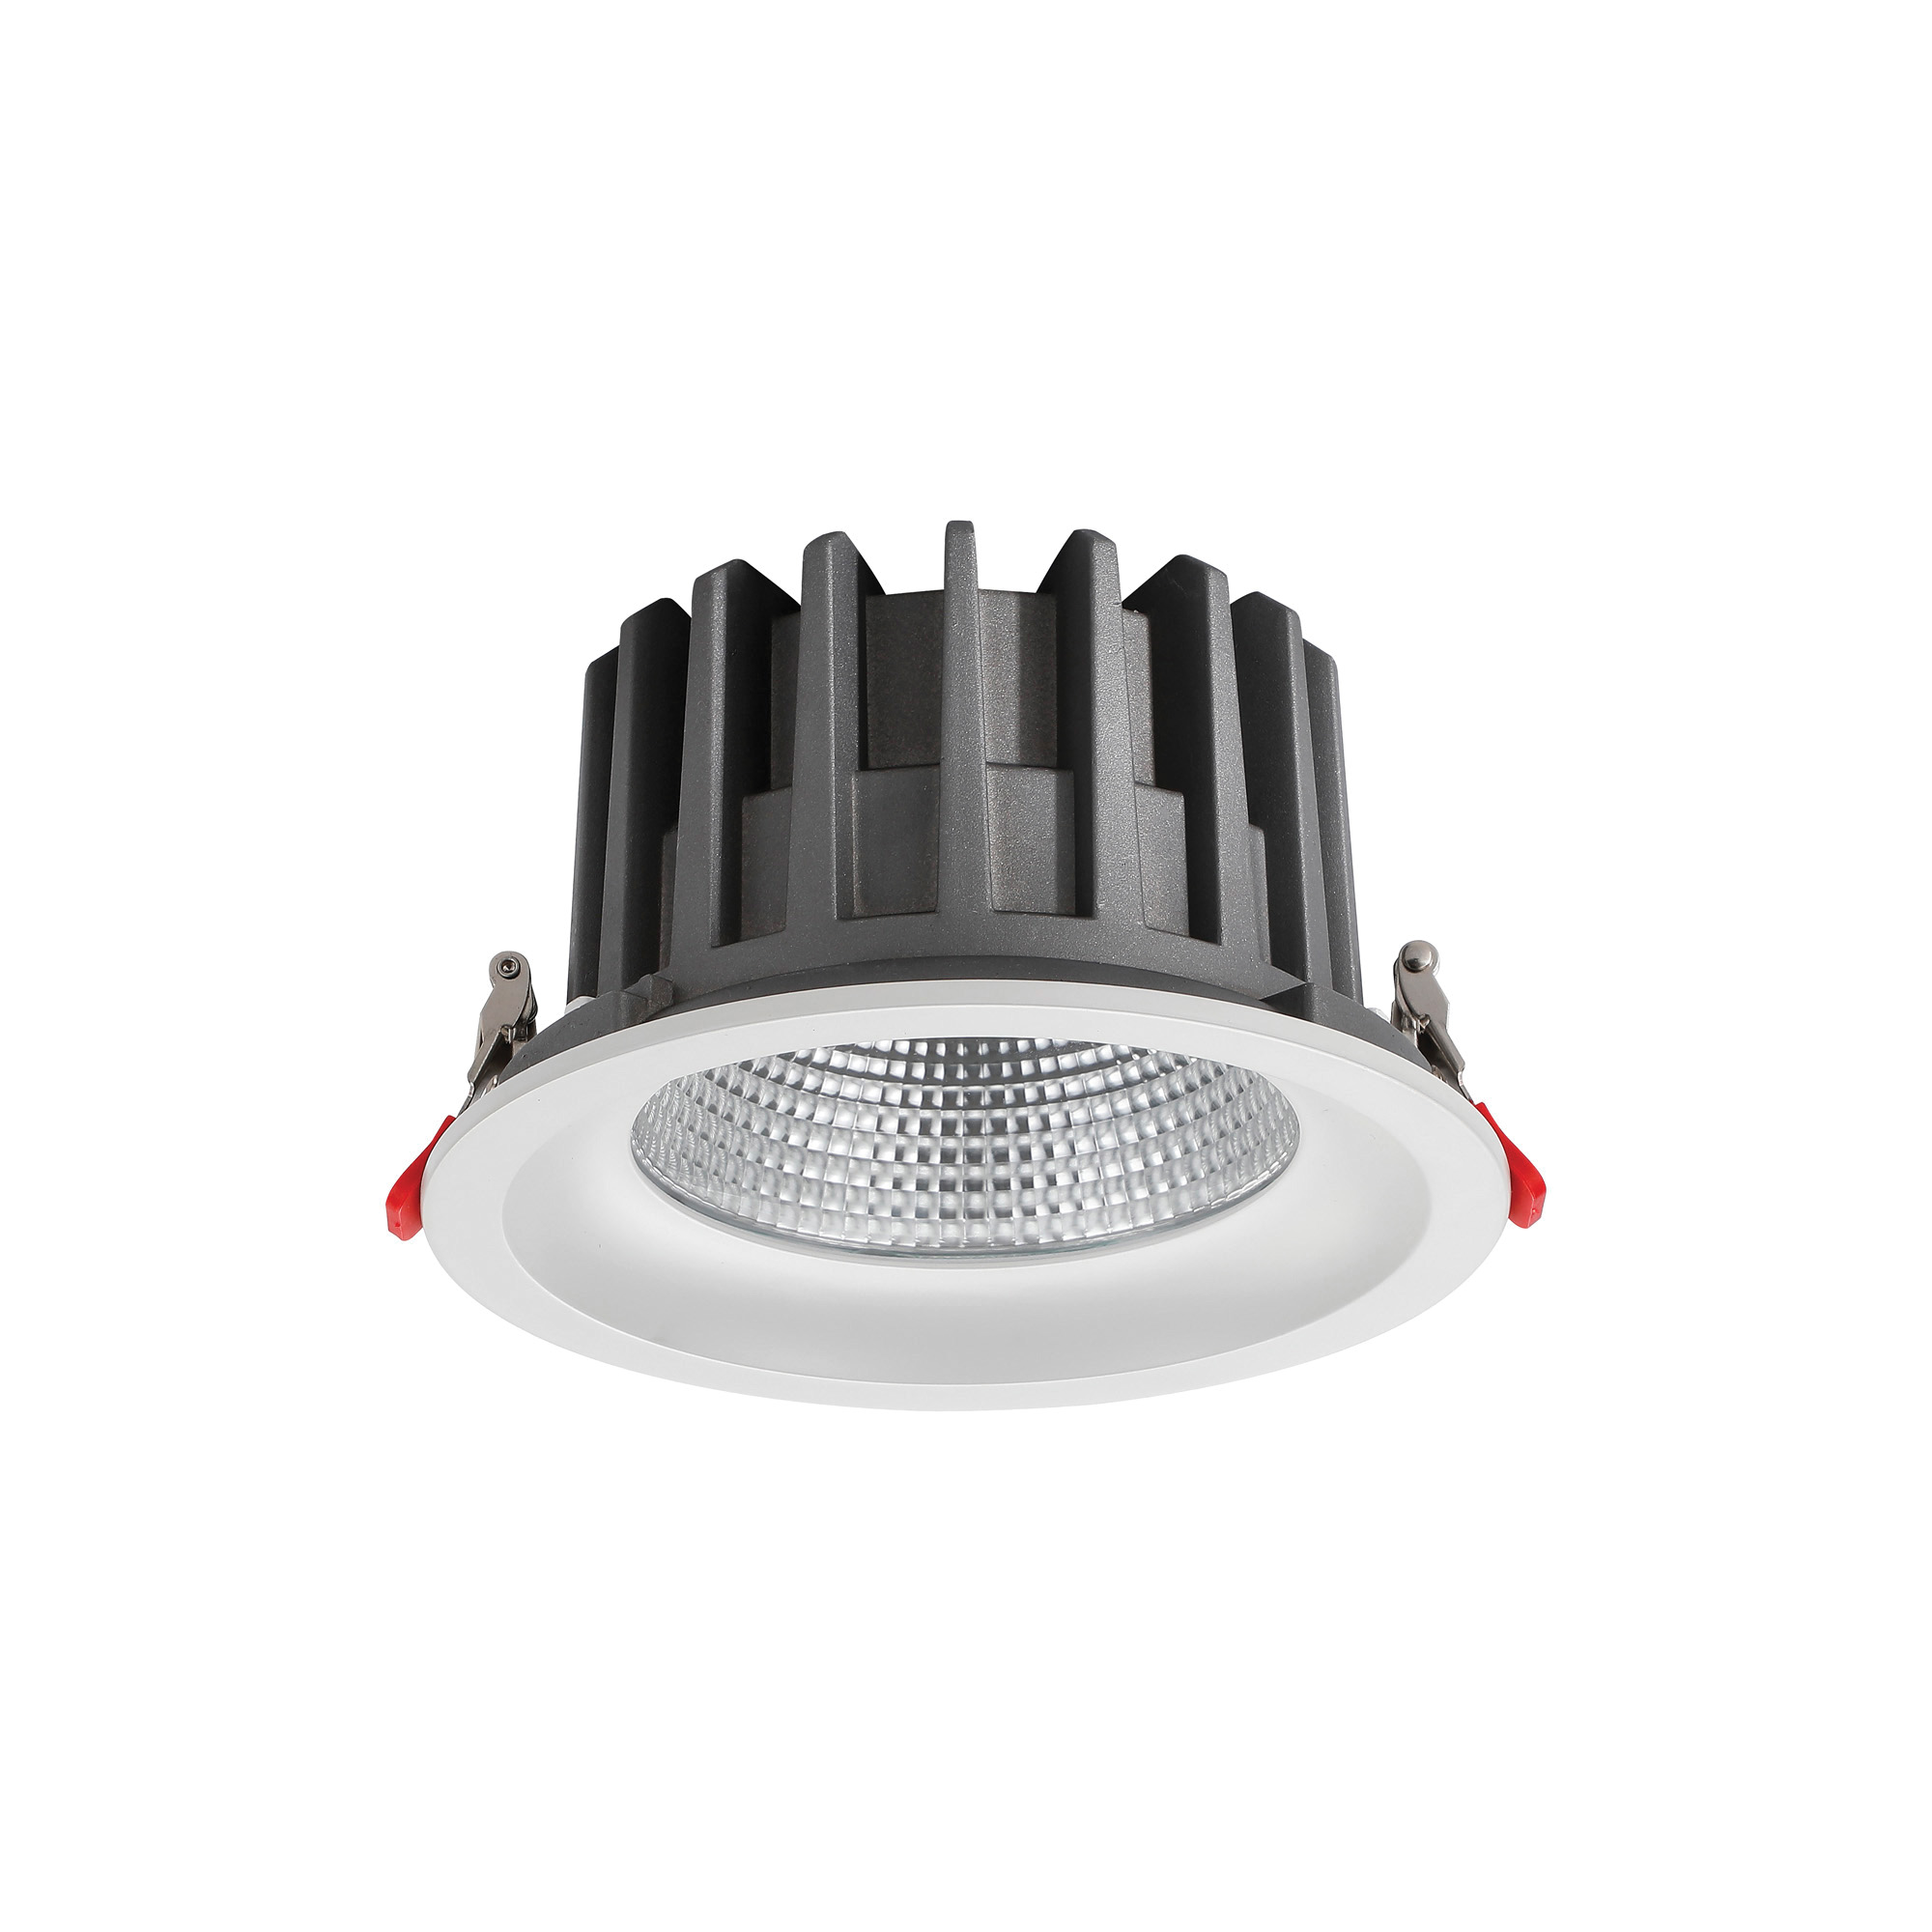 DL200066  Bionic 40; 40W; 1000mA; White Deep Round Recessed Downlight; 3600lm ;Cut Out 175mm; 40° ; 5000K; IP44; DRIVER INC.; 5yrs Warranty.